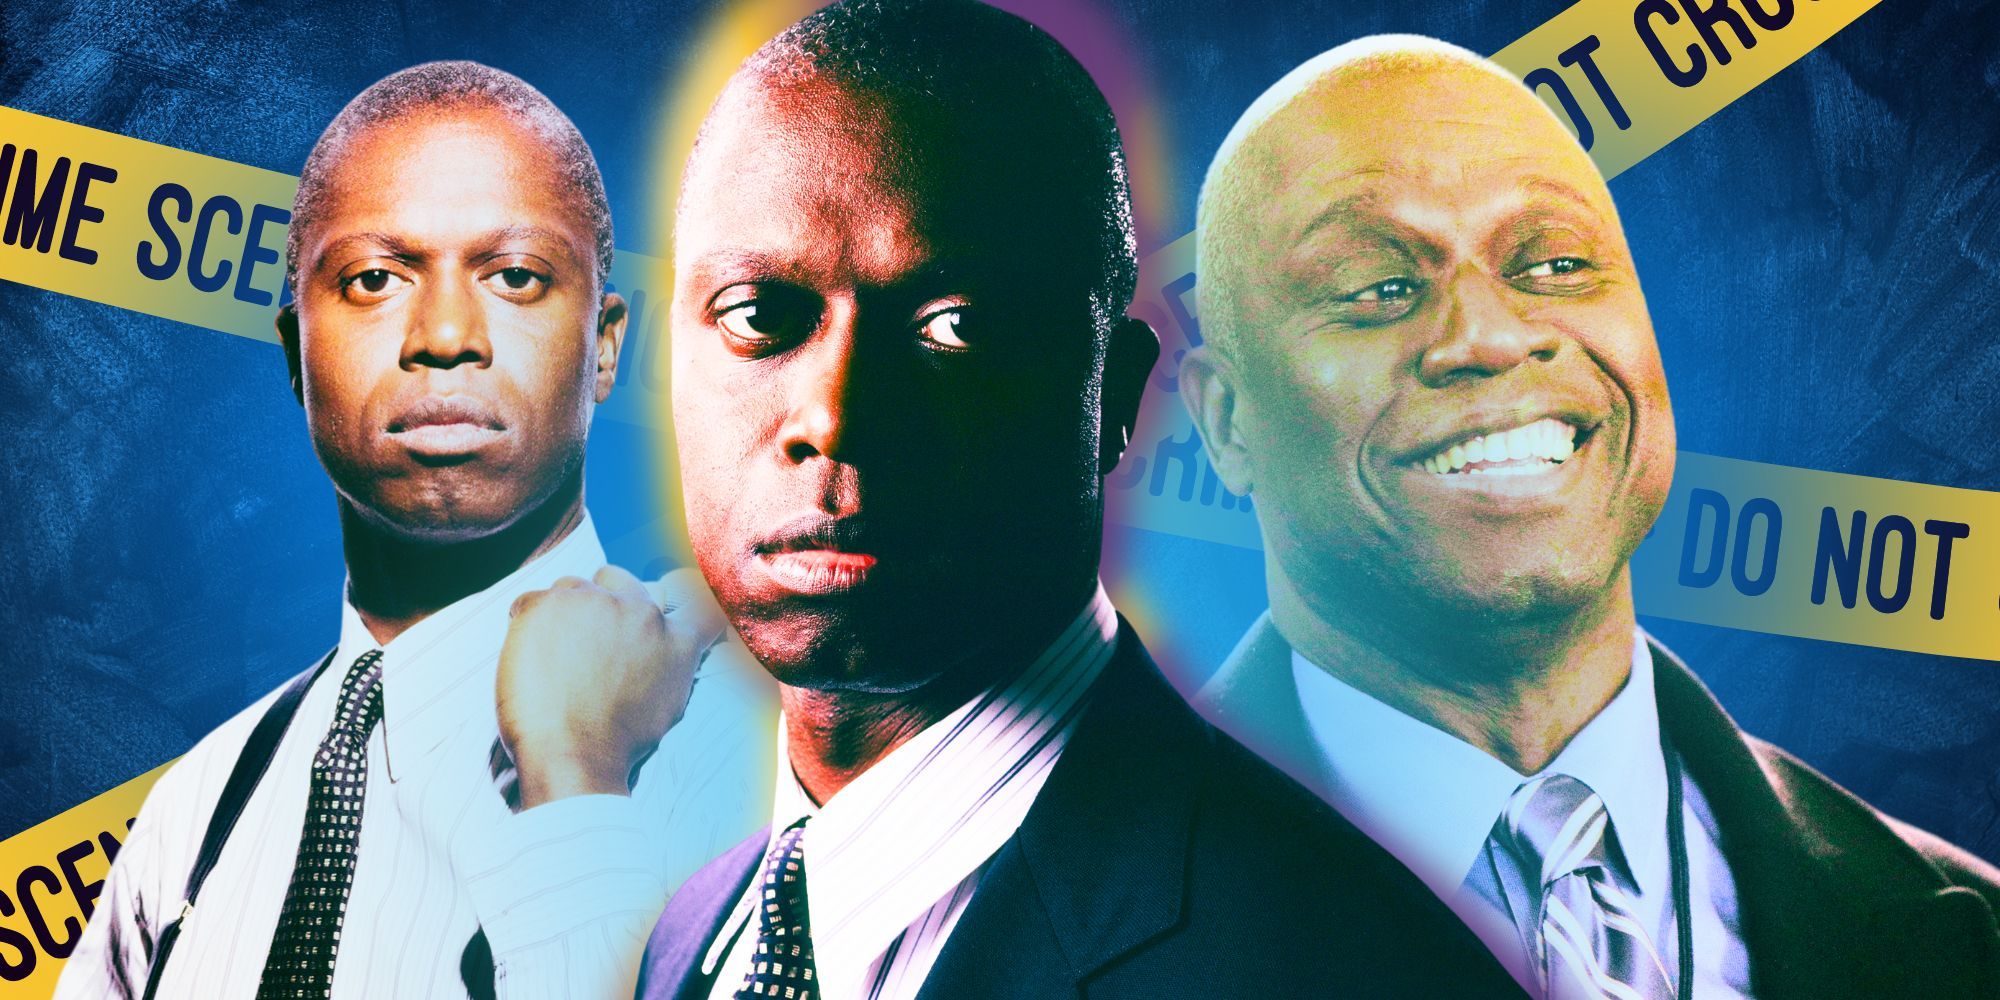 Andre Braugher's 10 Best Movies & TV Shows